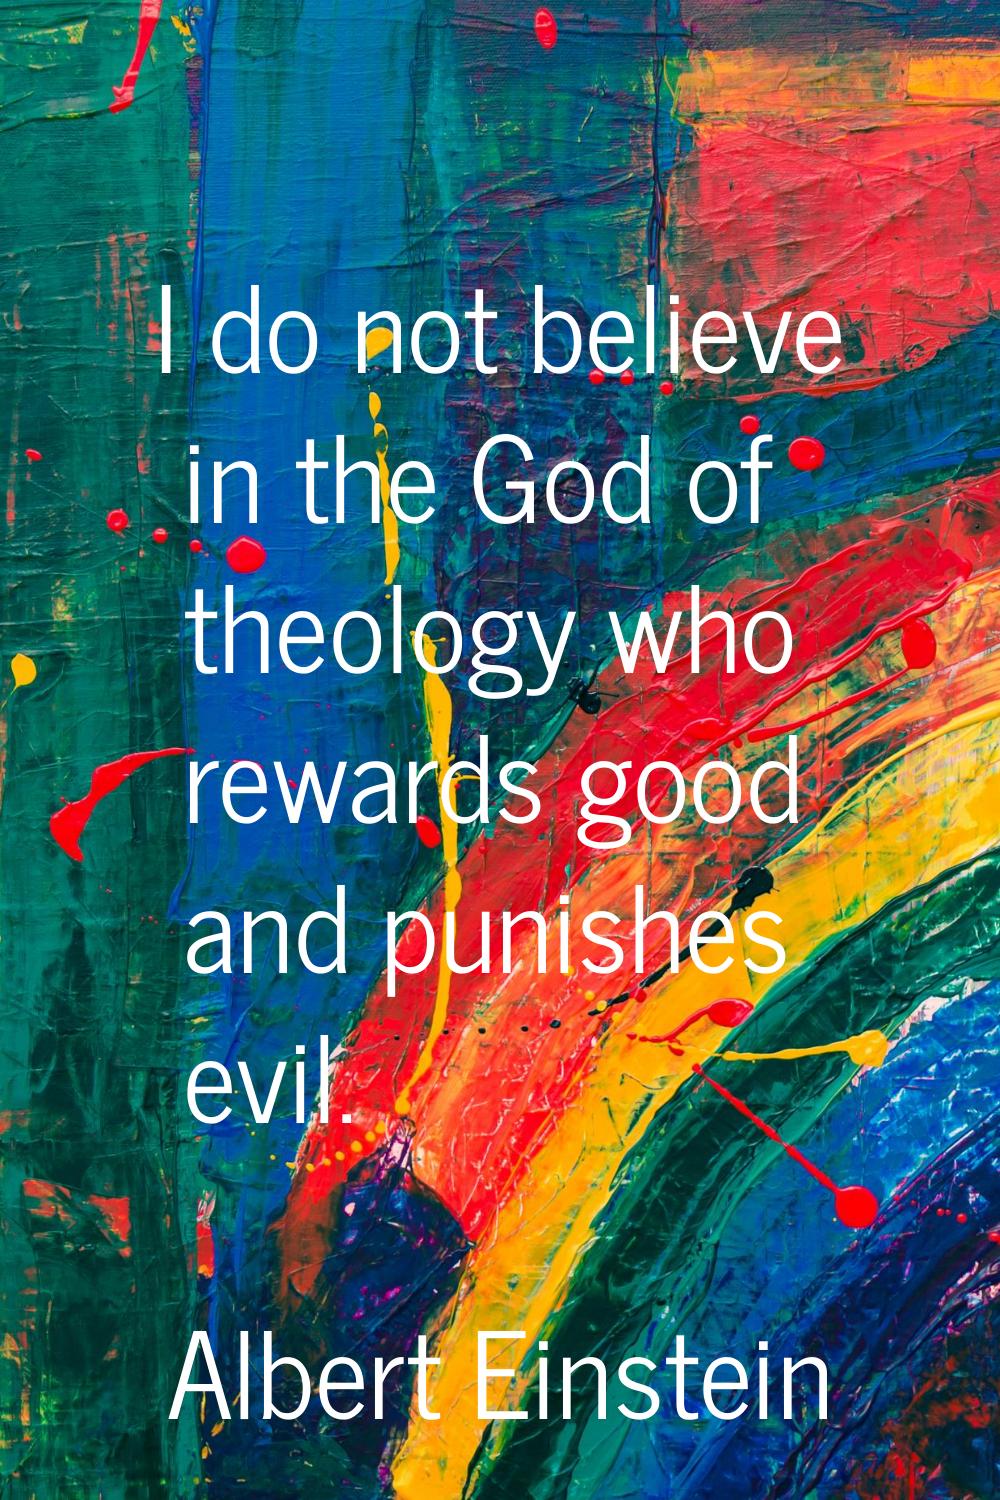 I do not believe in the God of theology who rewards good and punishes evil.